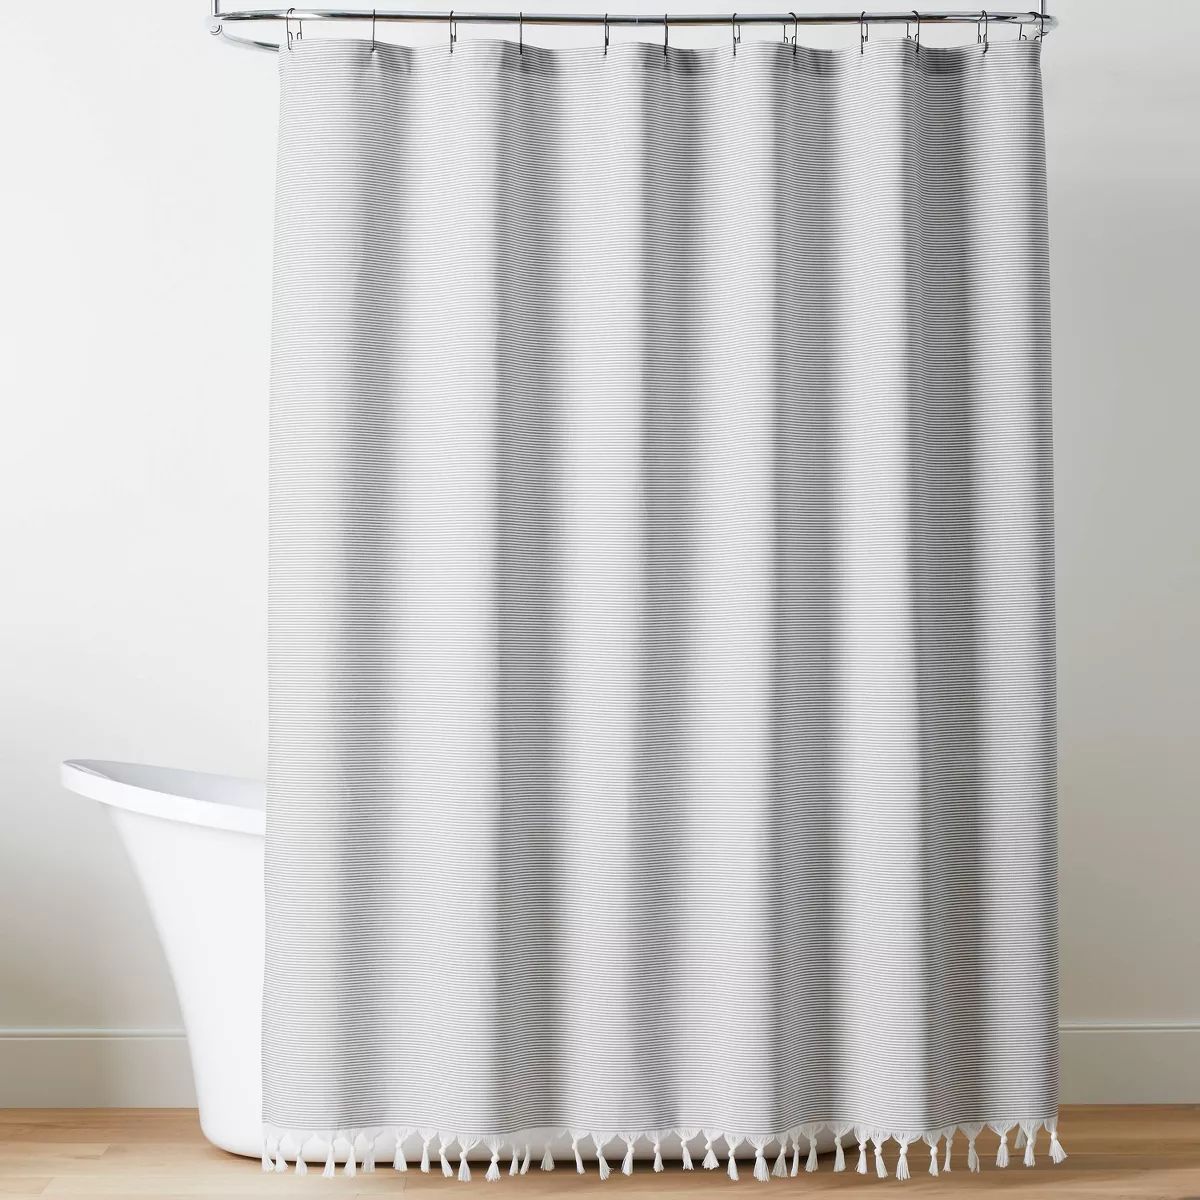 Ticking Stripe Woven Shower Curtain Gray/Cream - Hearth & Hand™ with Magnolia | Target